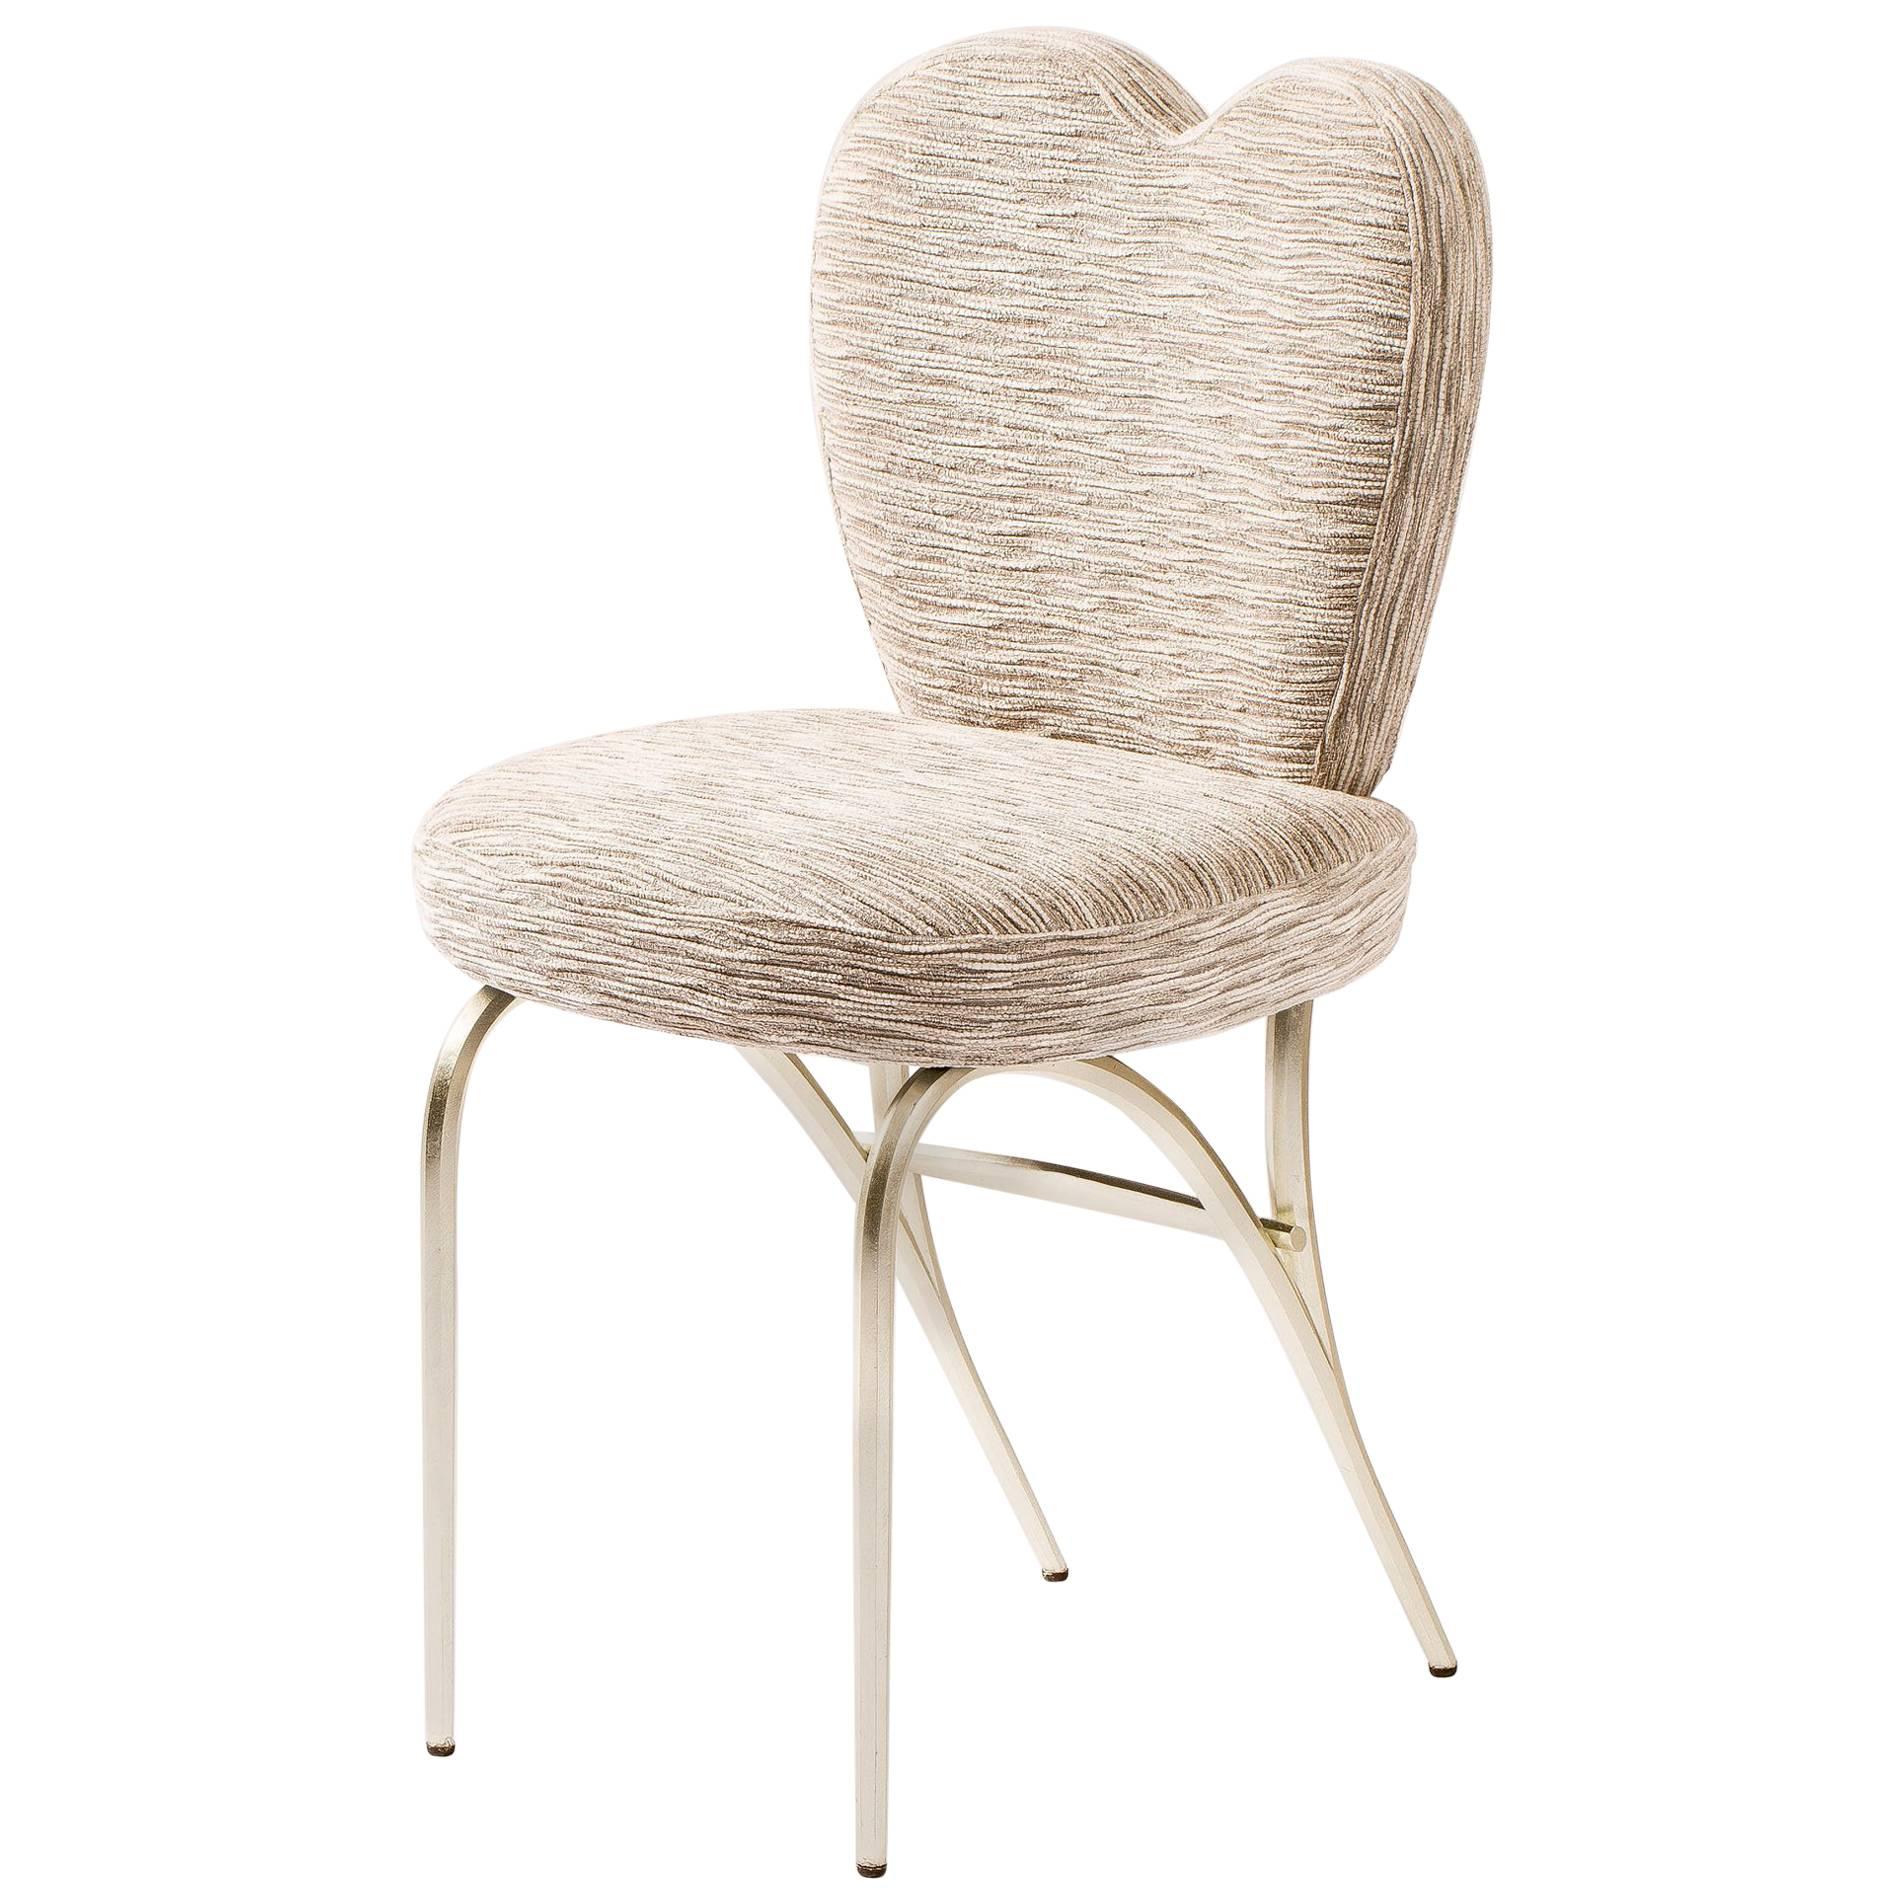 Hubert Le Gall "Judith" chair For Sale